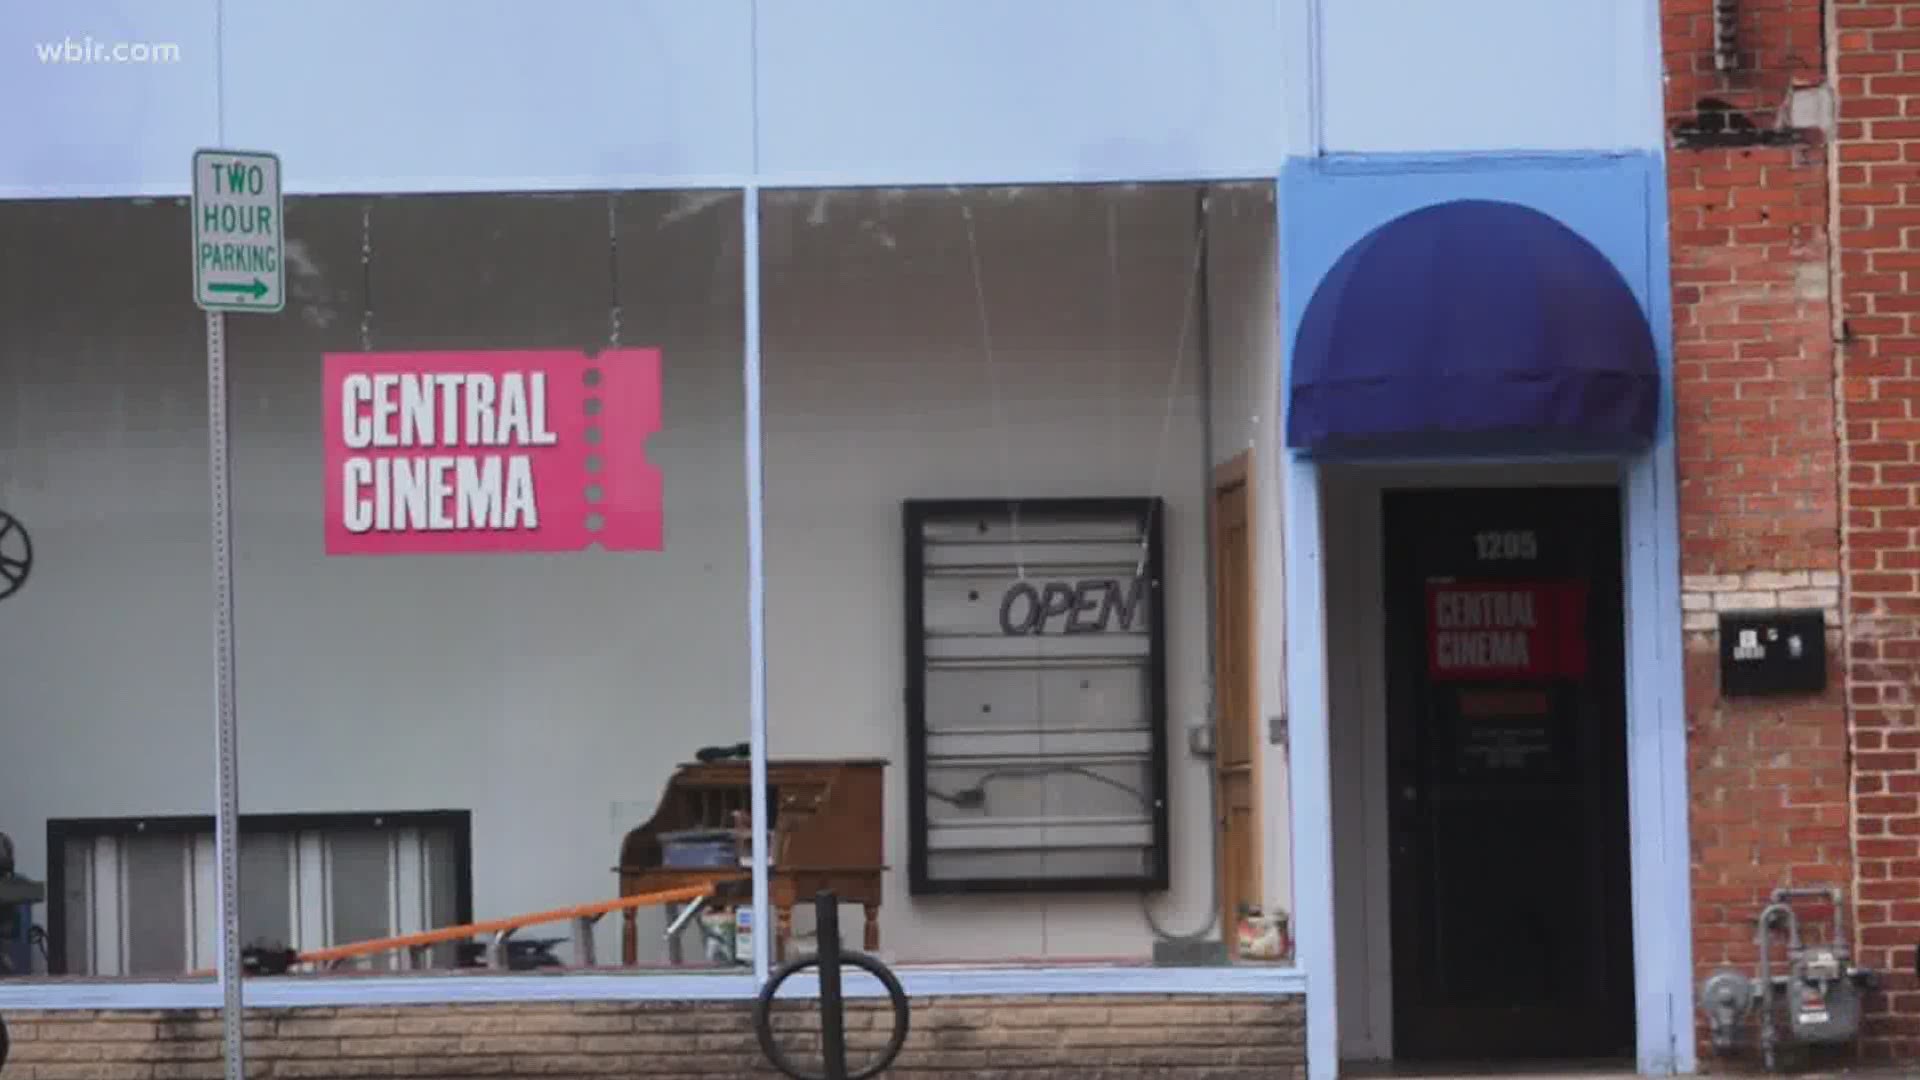 Central Cinema in Knoxville reopens on June 18 and guests will enjoy some new changes. June 17, 2020-4pm.